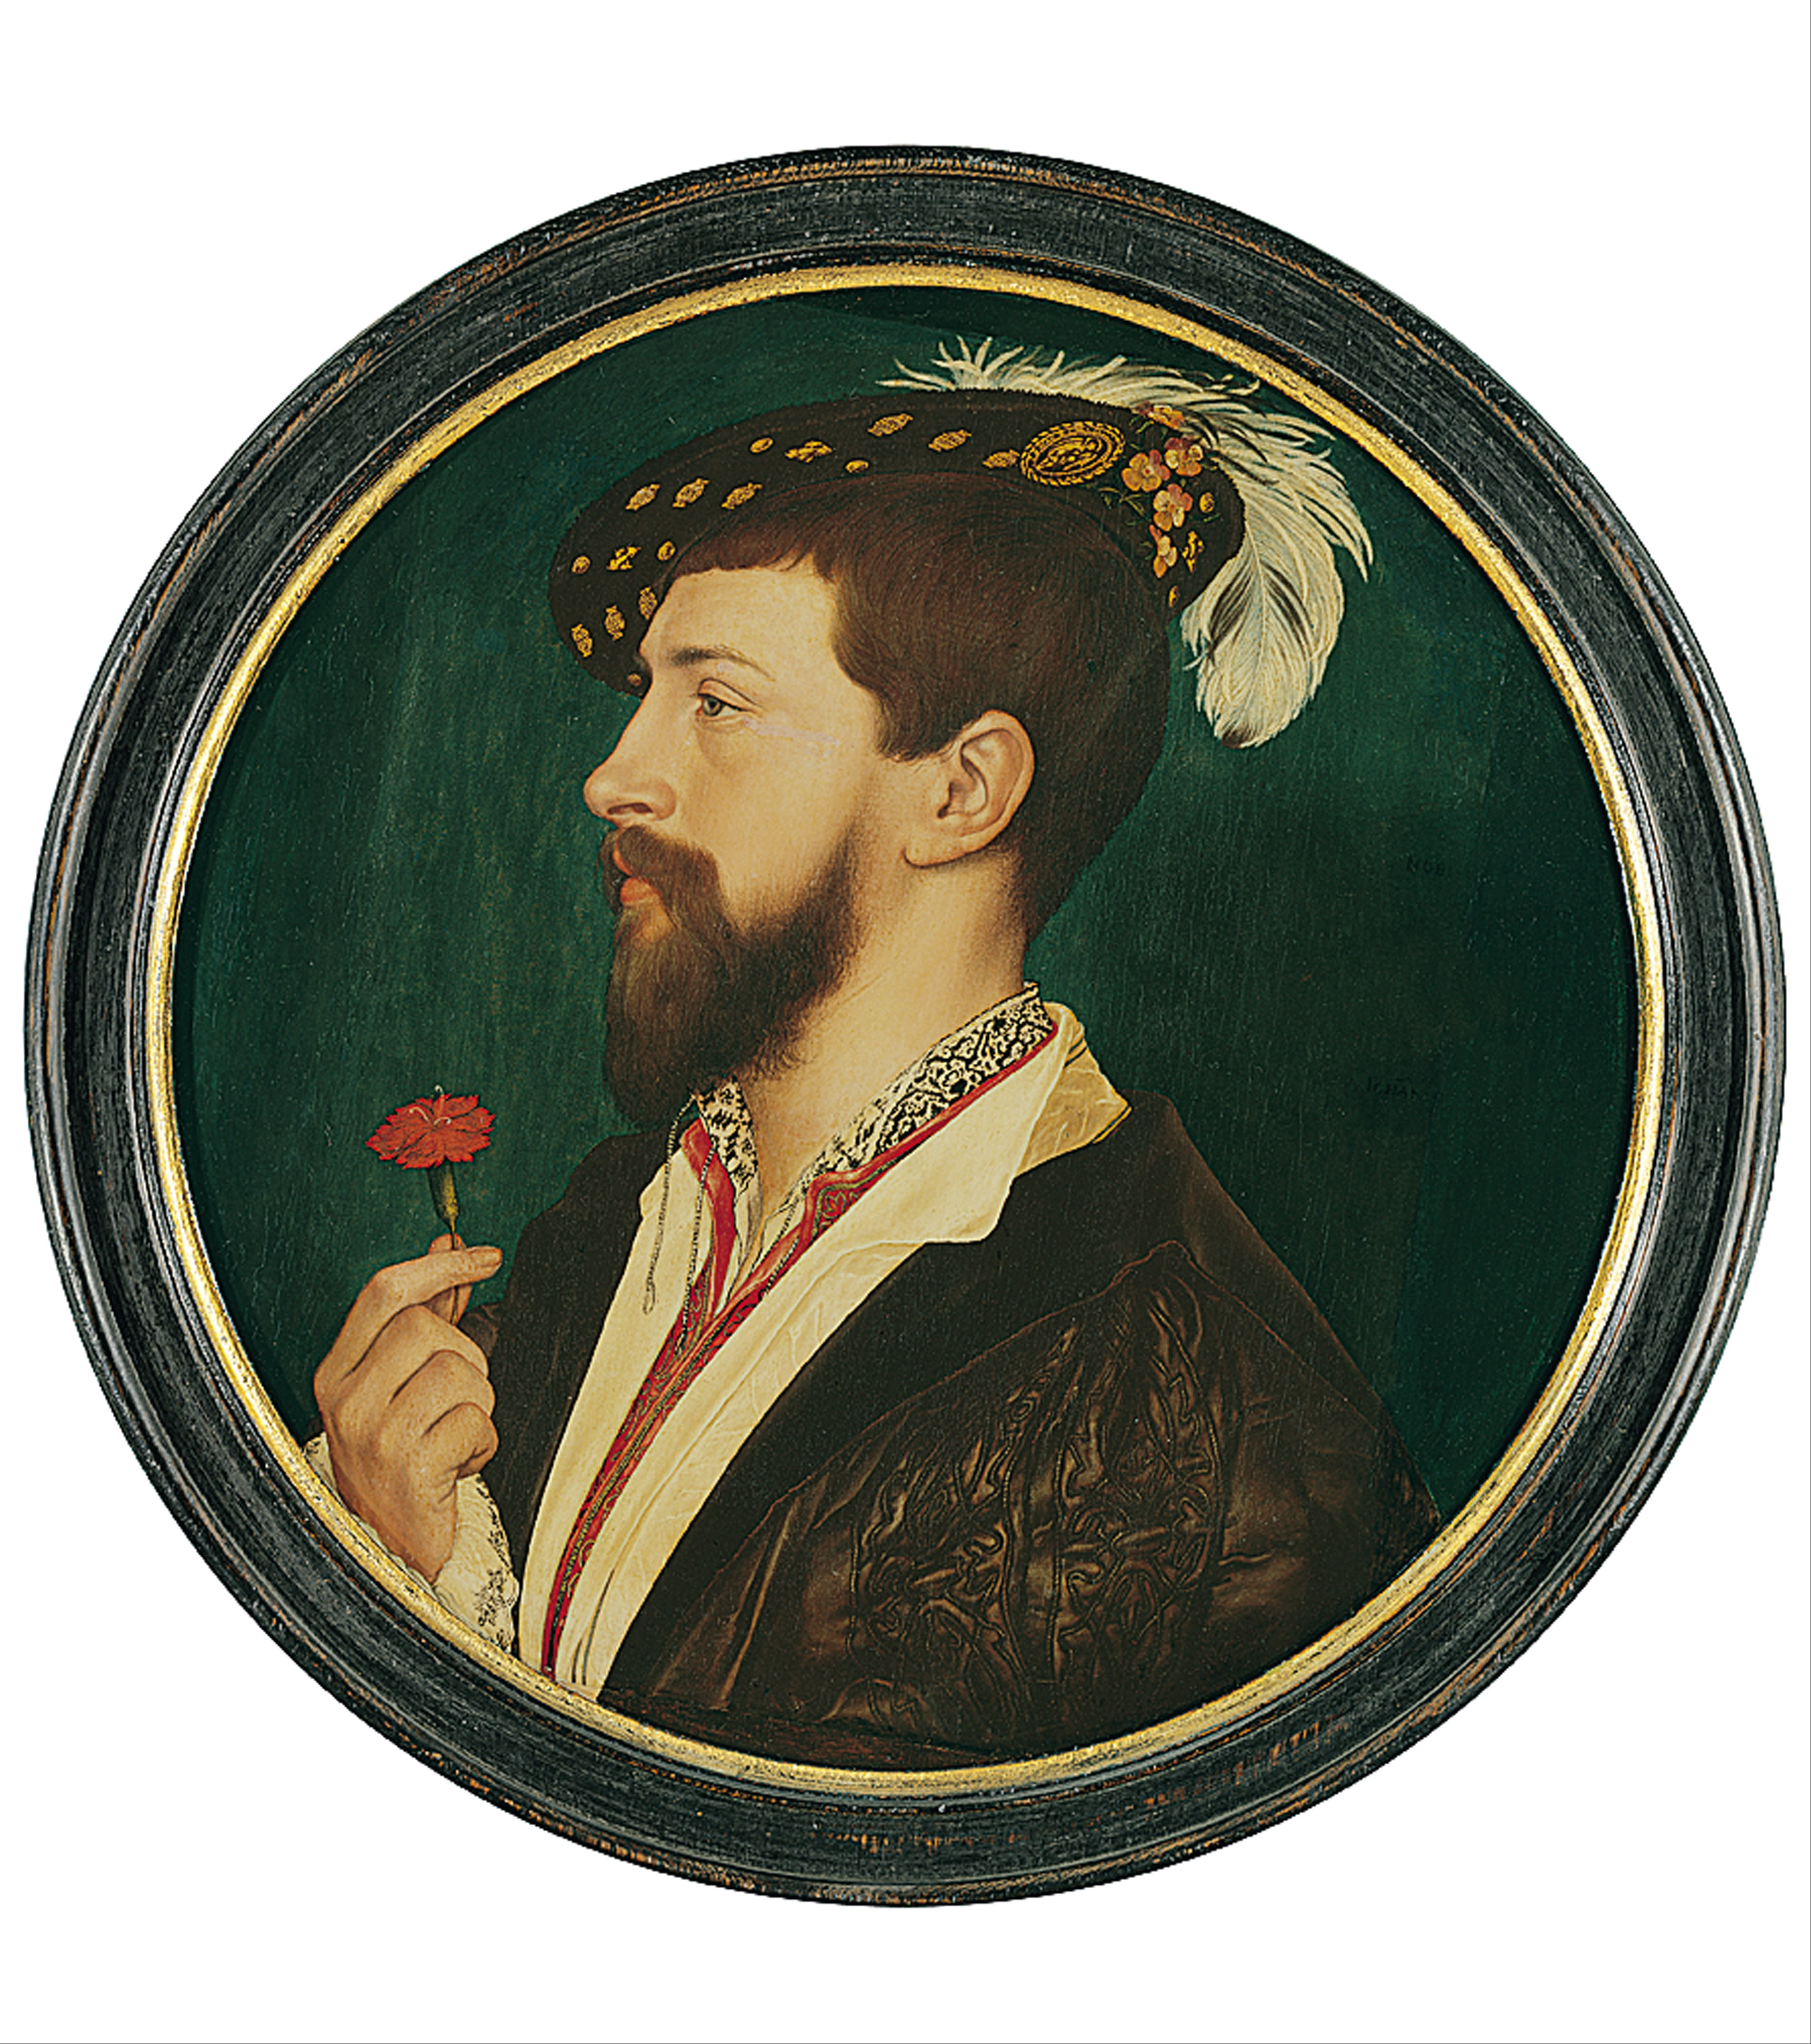 Hans Holbein the Younger - Portrait of Simon George of Cornwall - Google Art Project